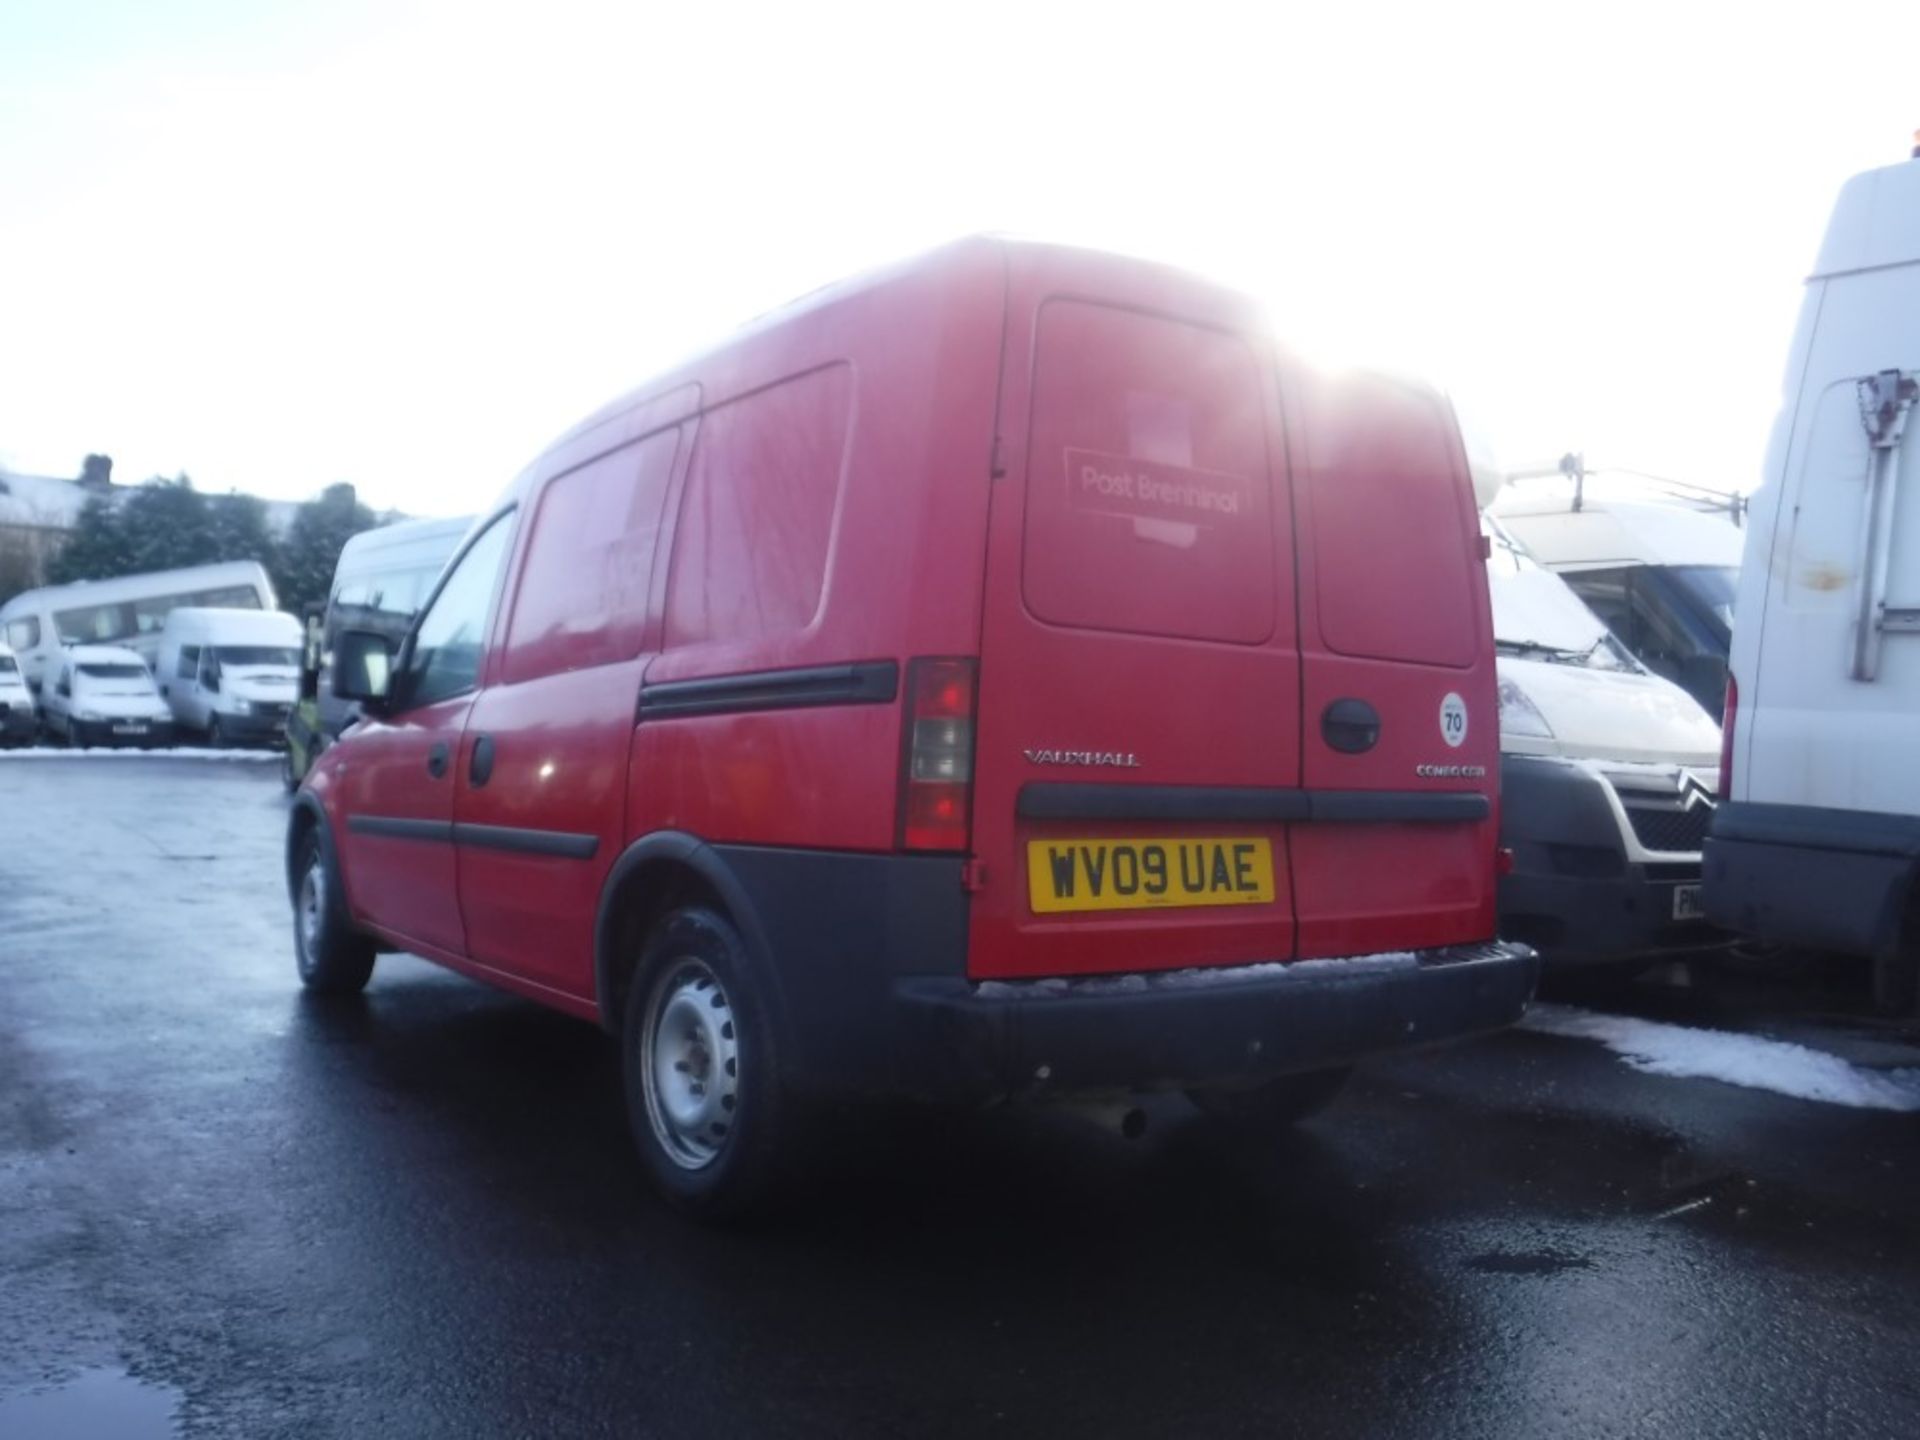 09 reg VAUXHALL COMBO 1700 CDTI, 1ST REG 03/09, TEST 02/19, 136458M WARRANTED, V5 HERE, 1 OWNER FROM - Image 3 of 5